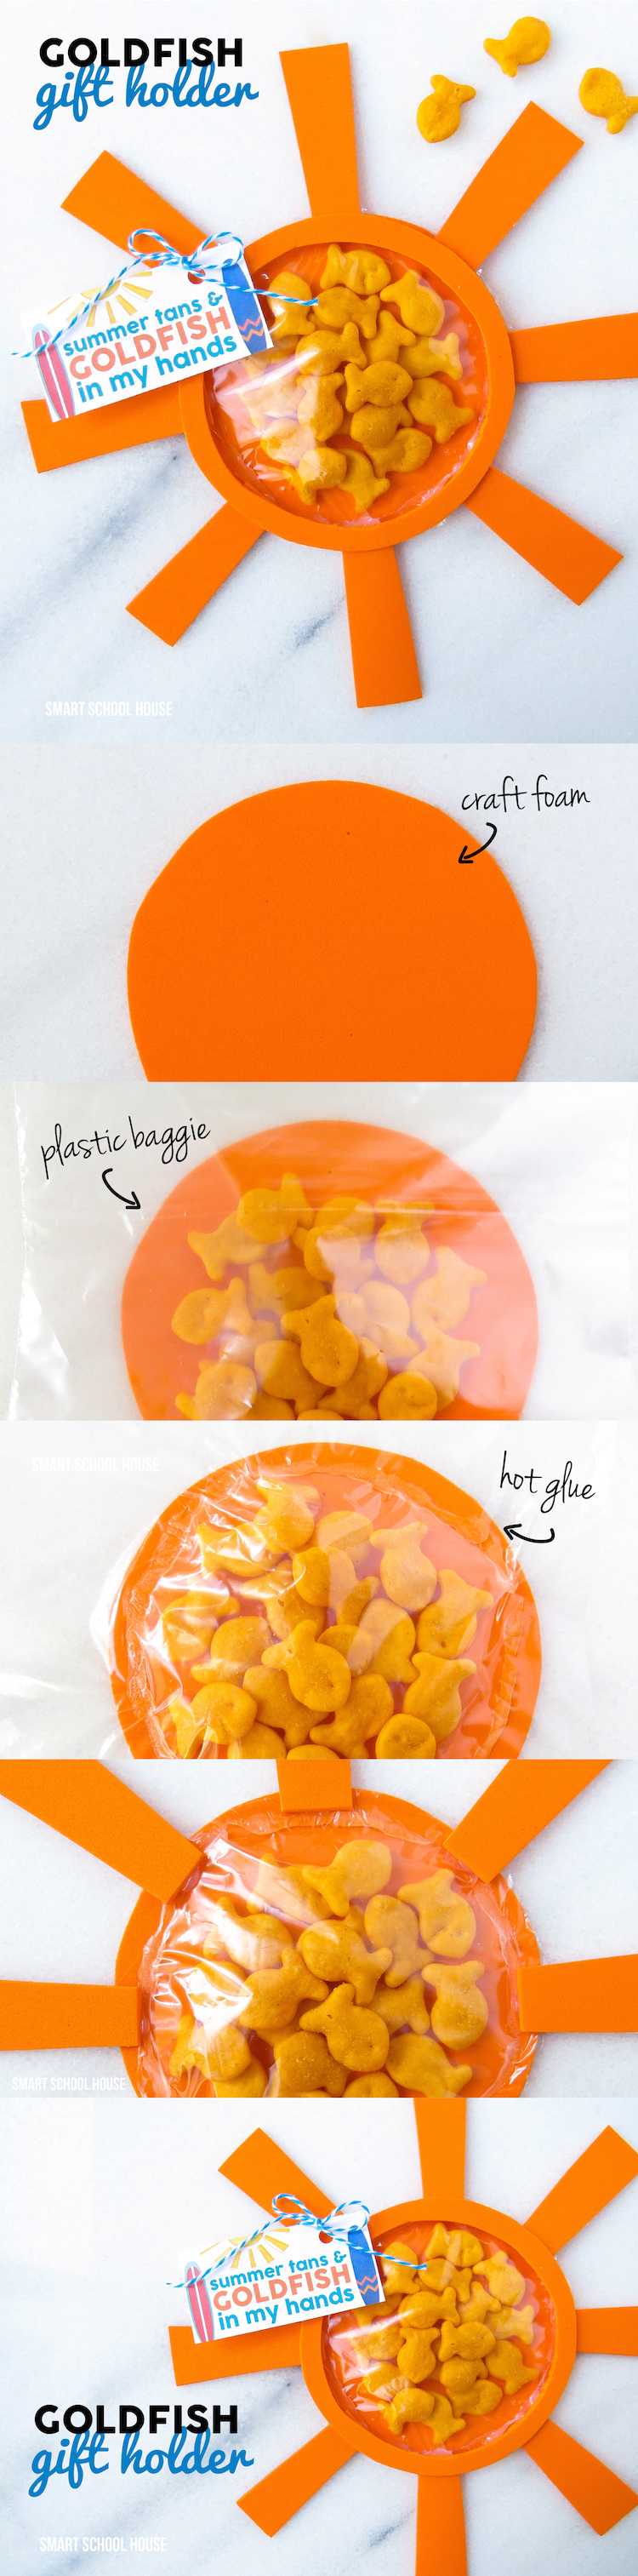 Summer Tans and Goldfish in my Hands. A Goldfish gift holder and free printable. I love this easy DIY summer gift idea!